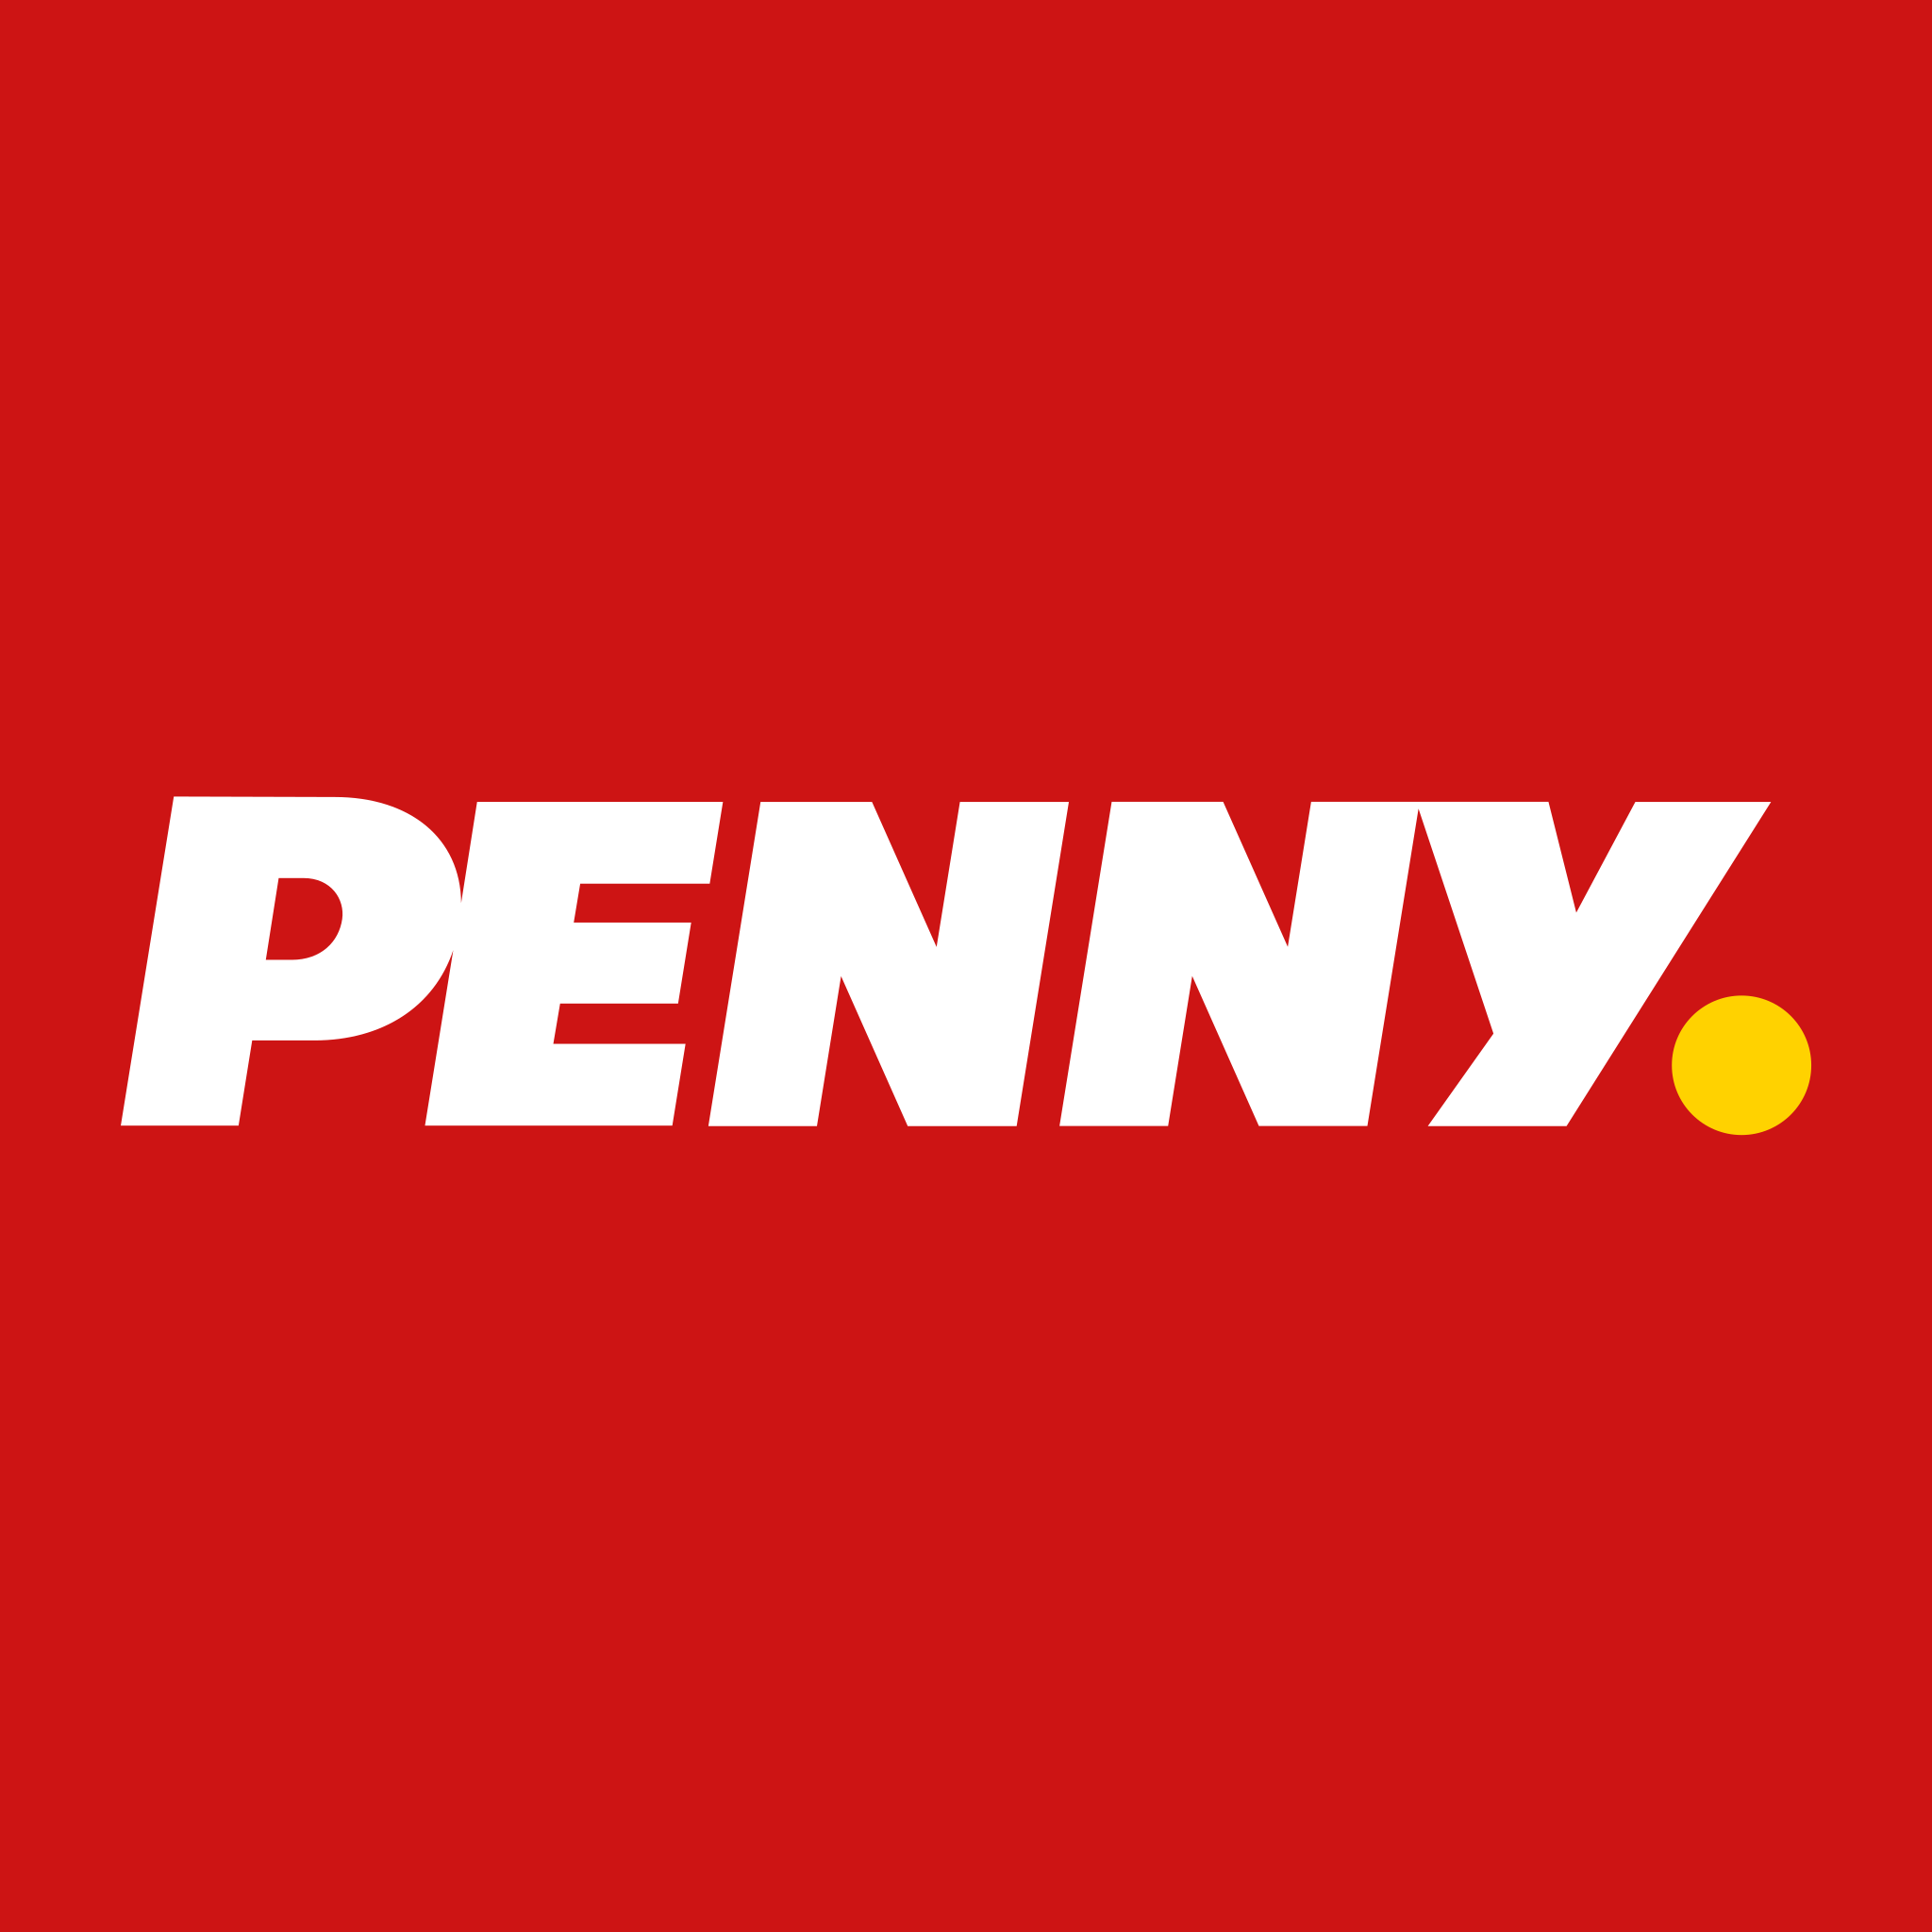 Penny Market Coupons